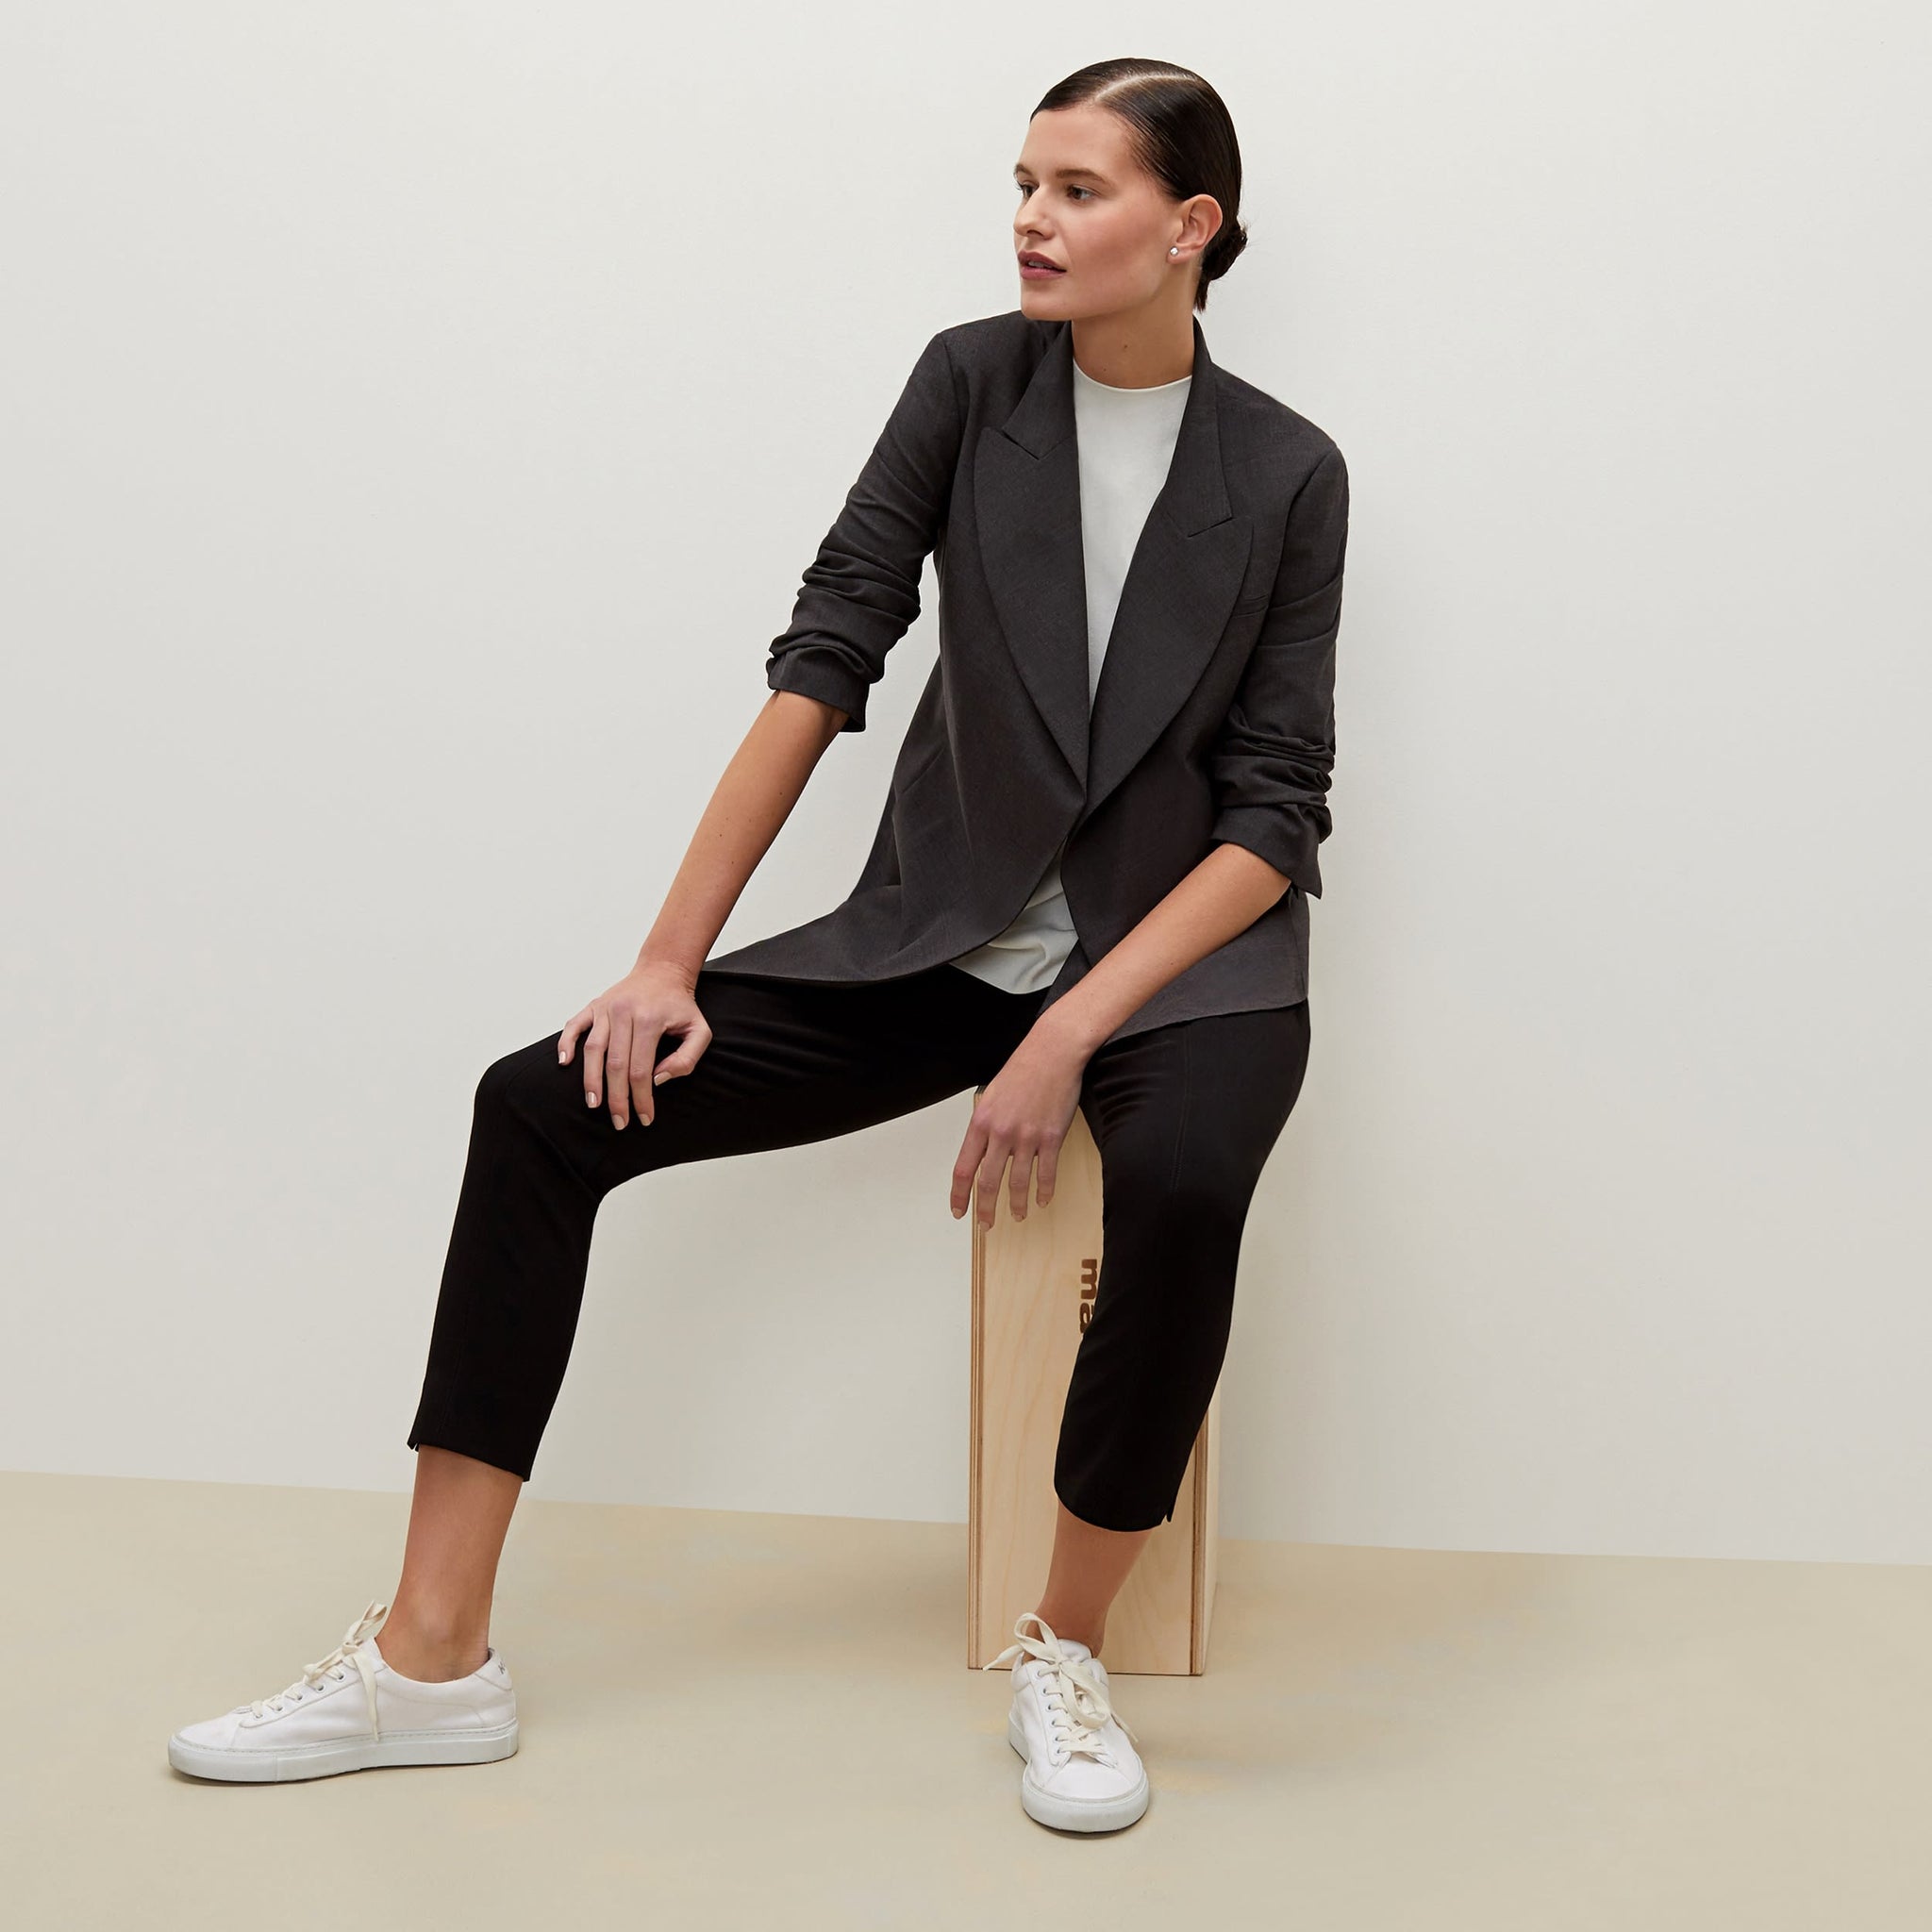 Side image of a woman standing wearing the Marais pant in black